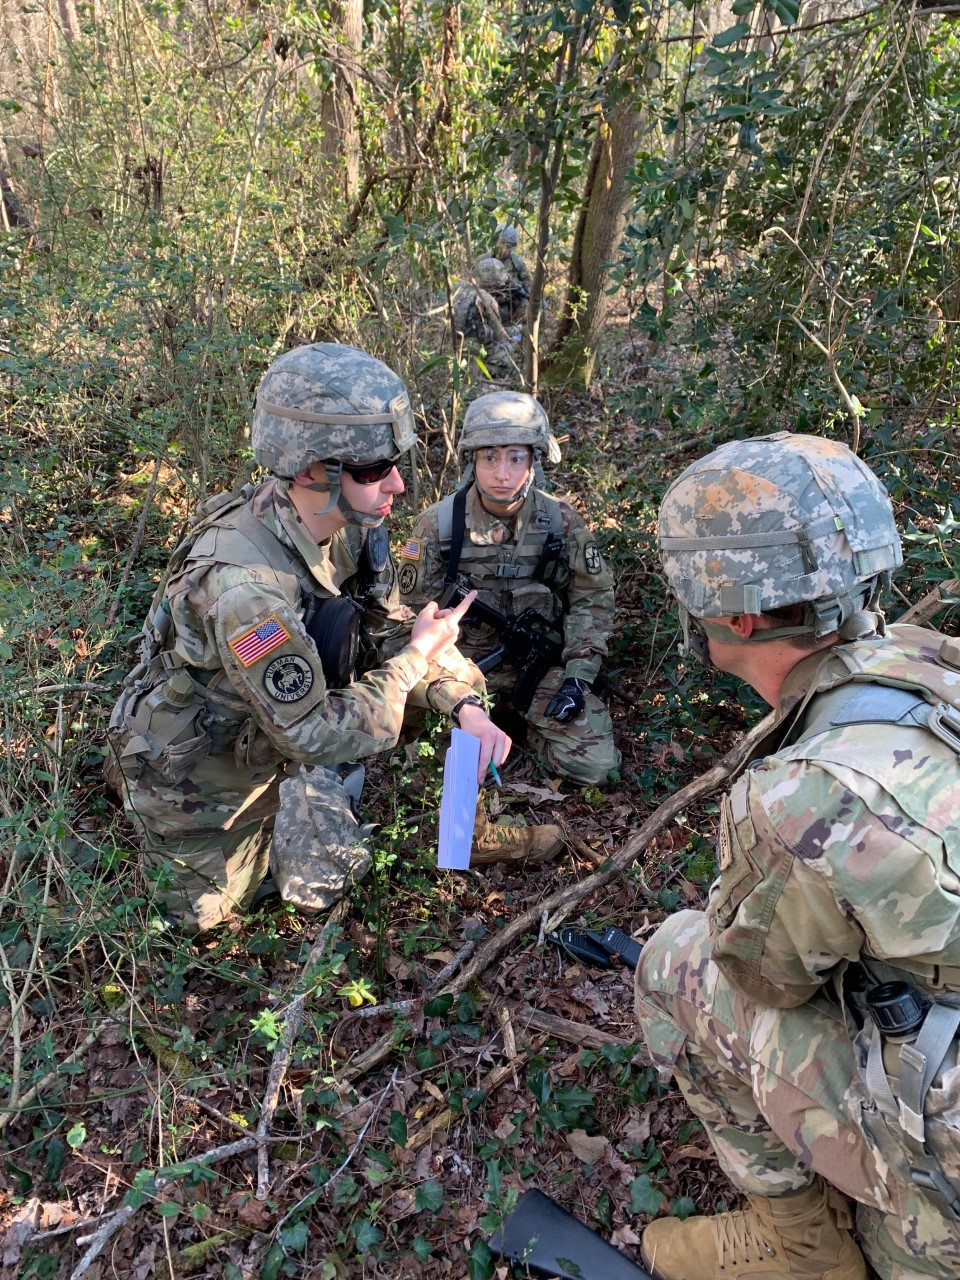 Students squatting in the woods, military dress on